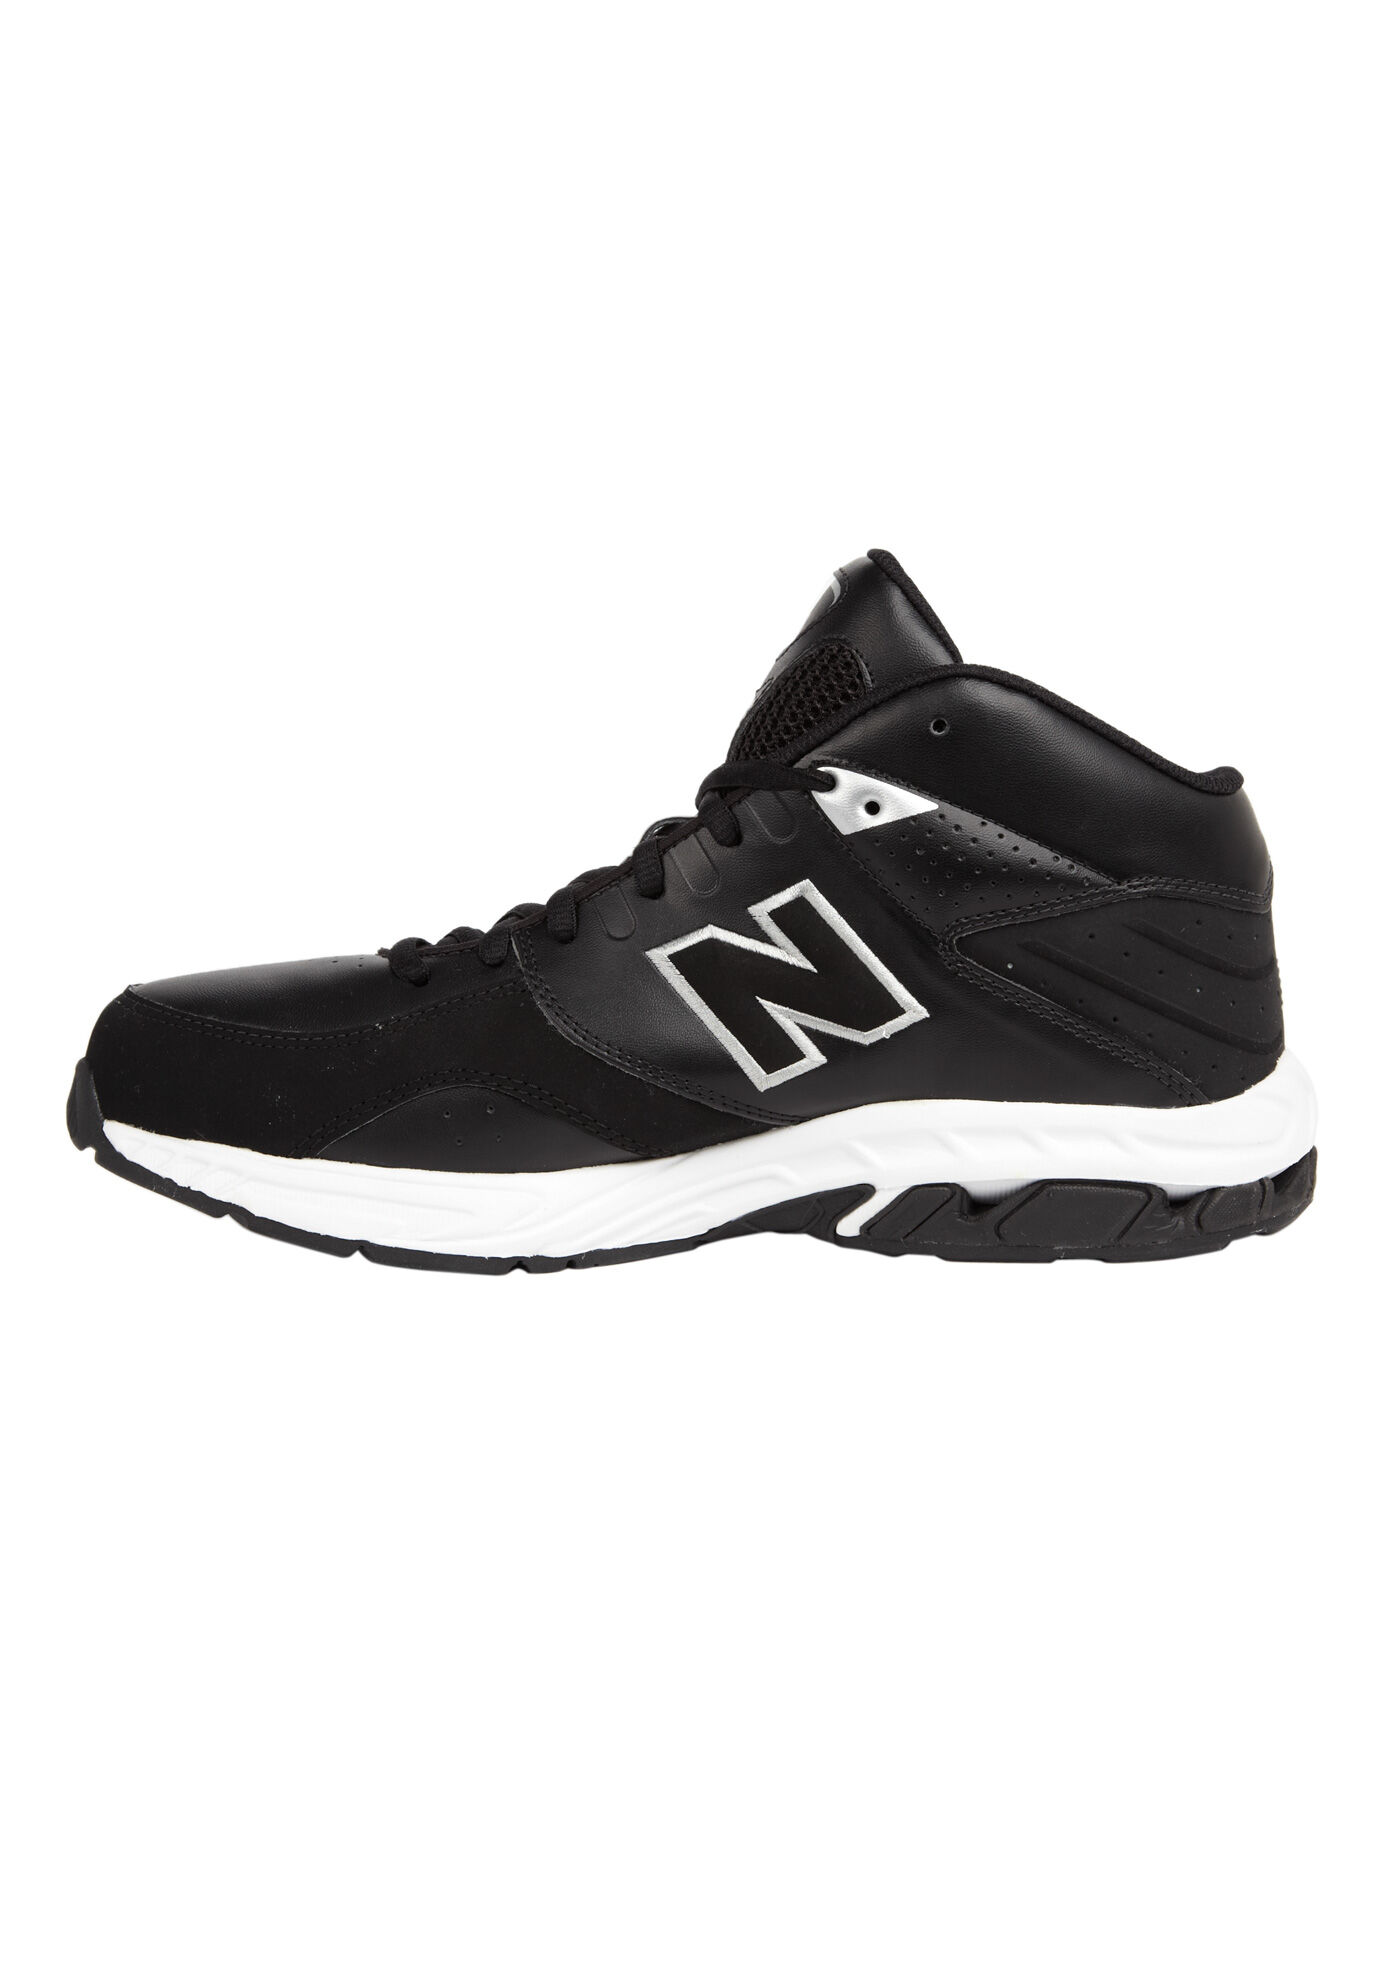 New Balance 581 Basketball Shoes Online 